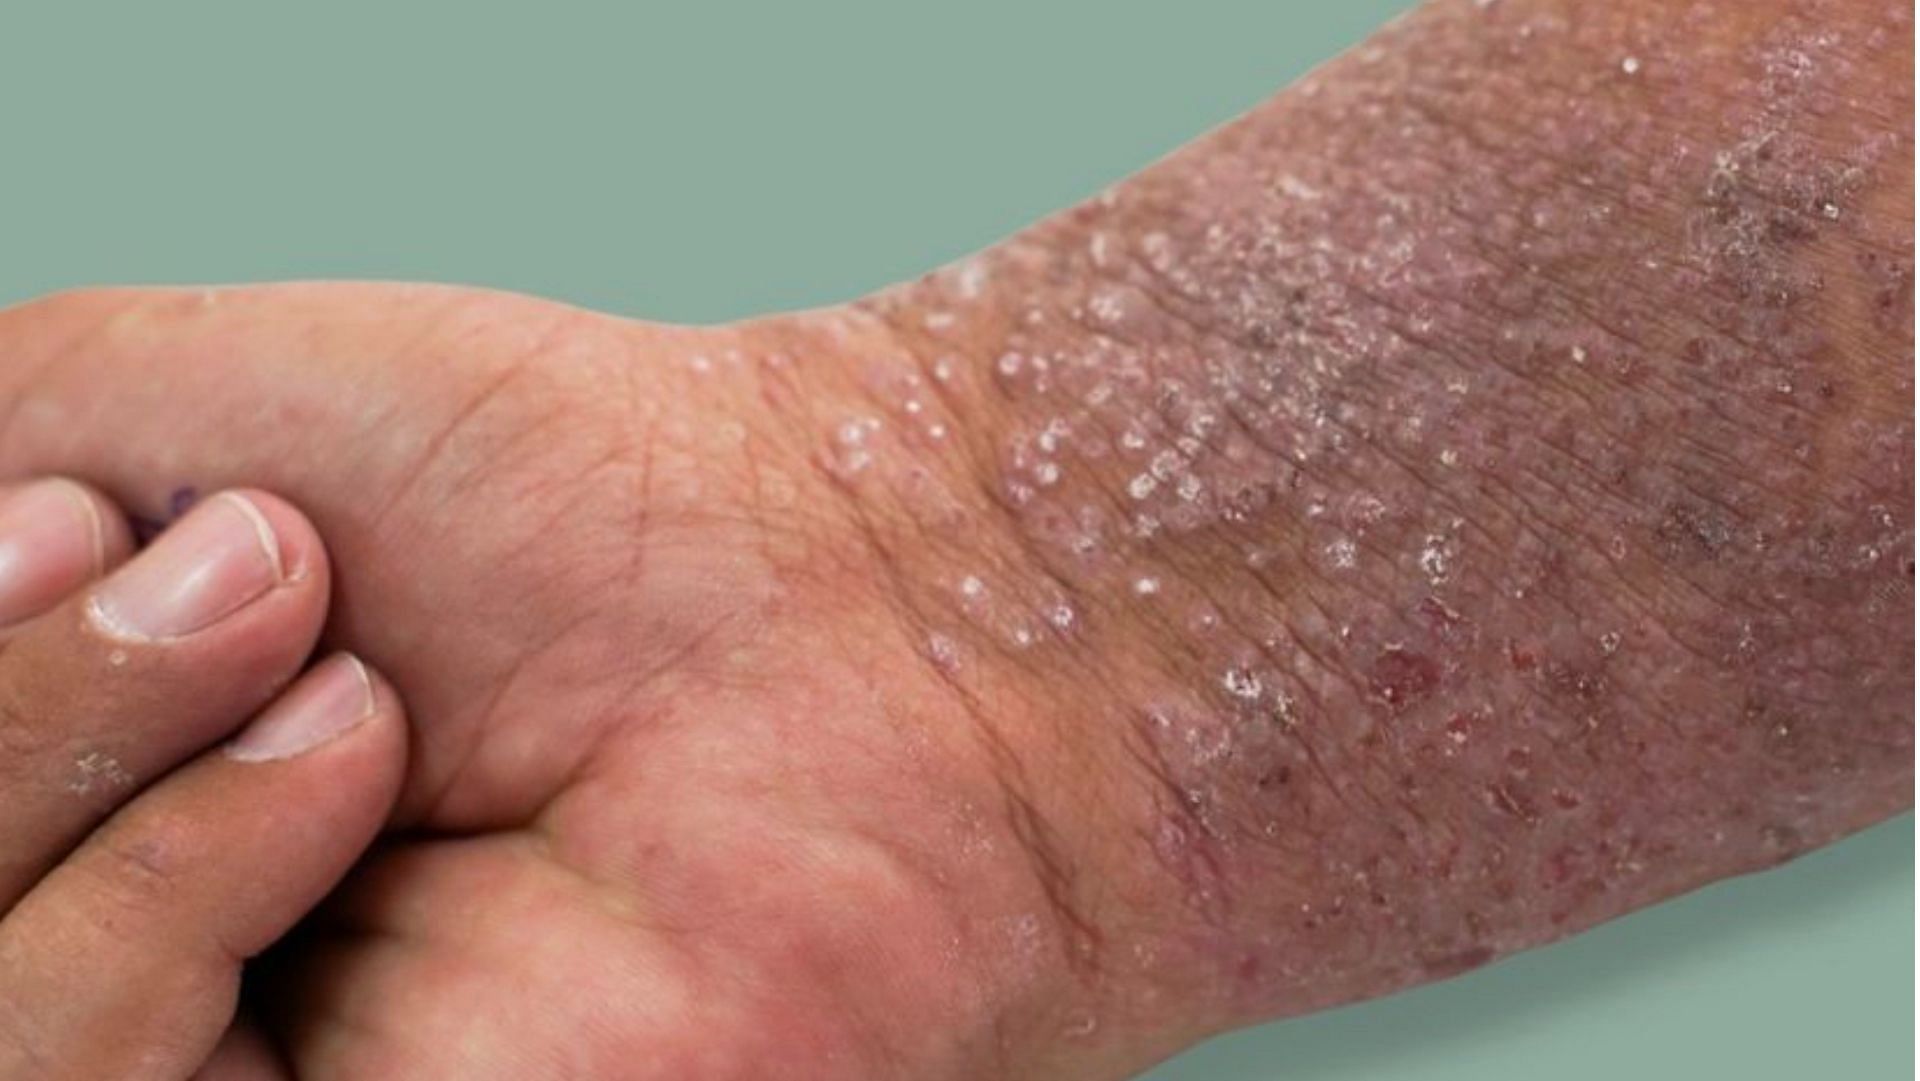 5 Common Types Of Rashes You Should Know About